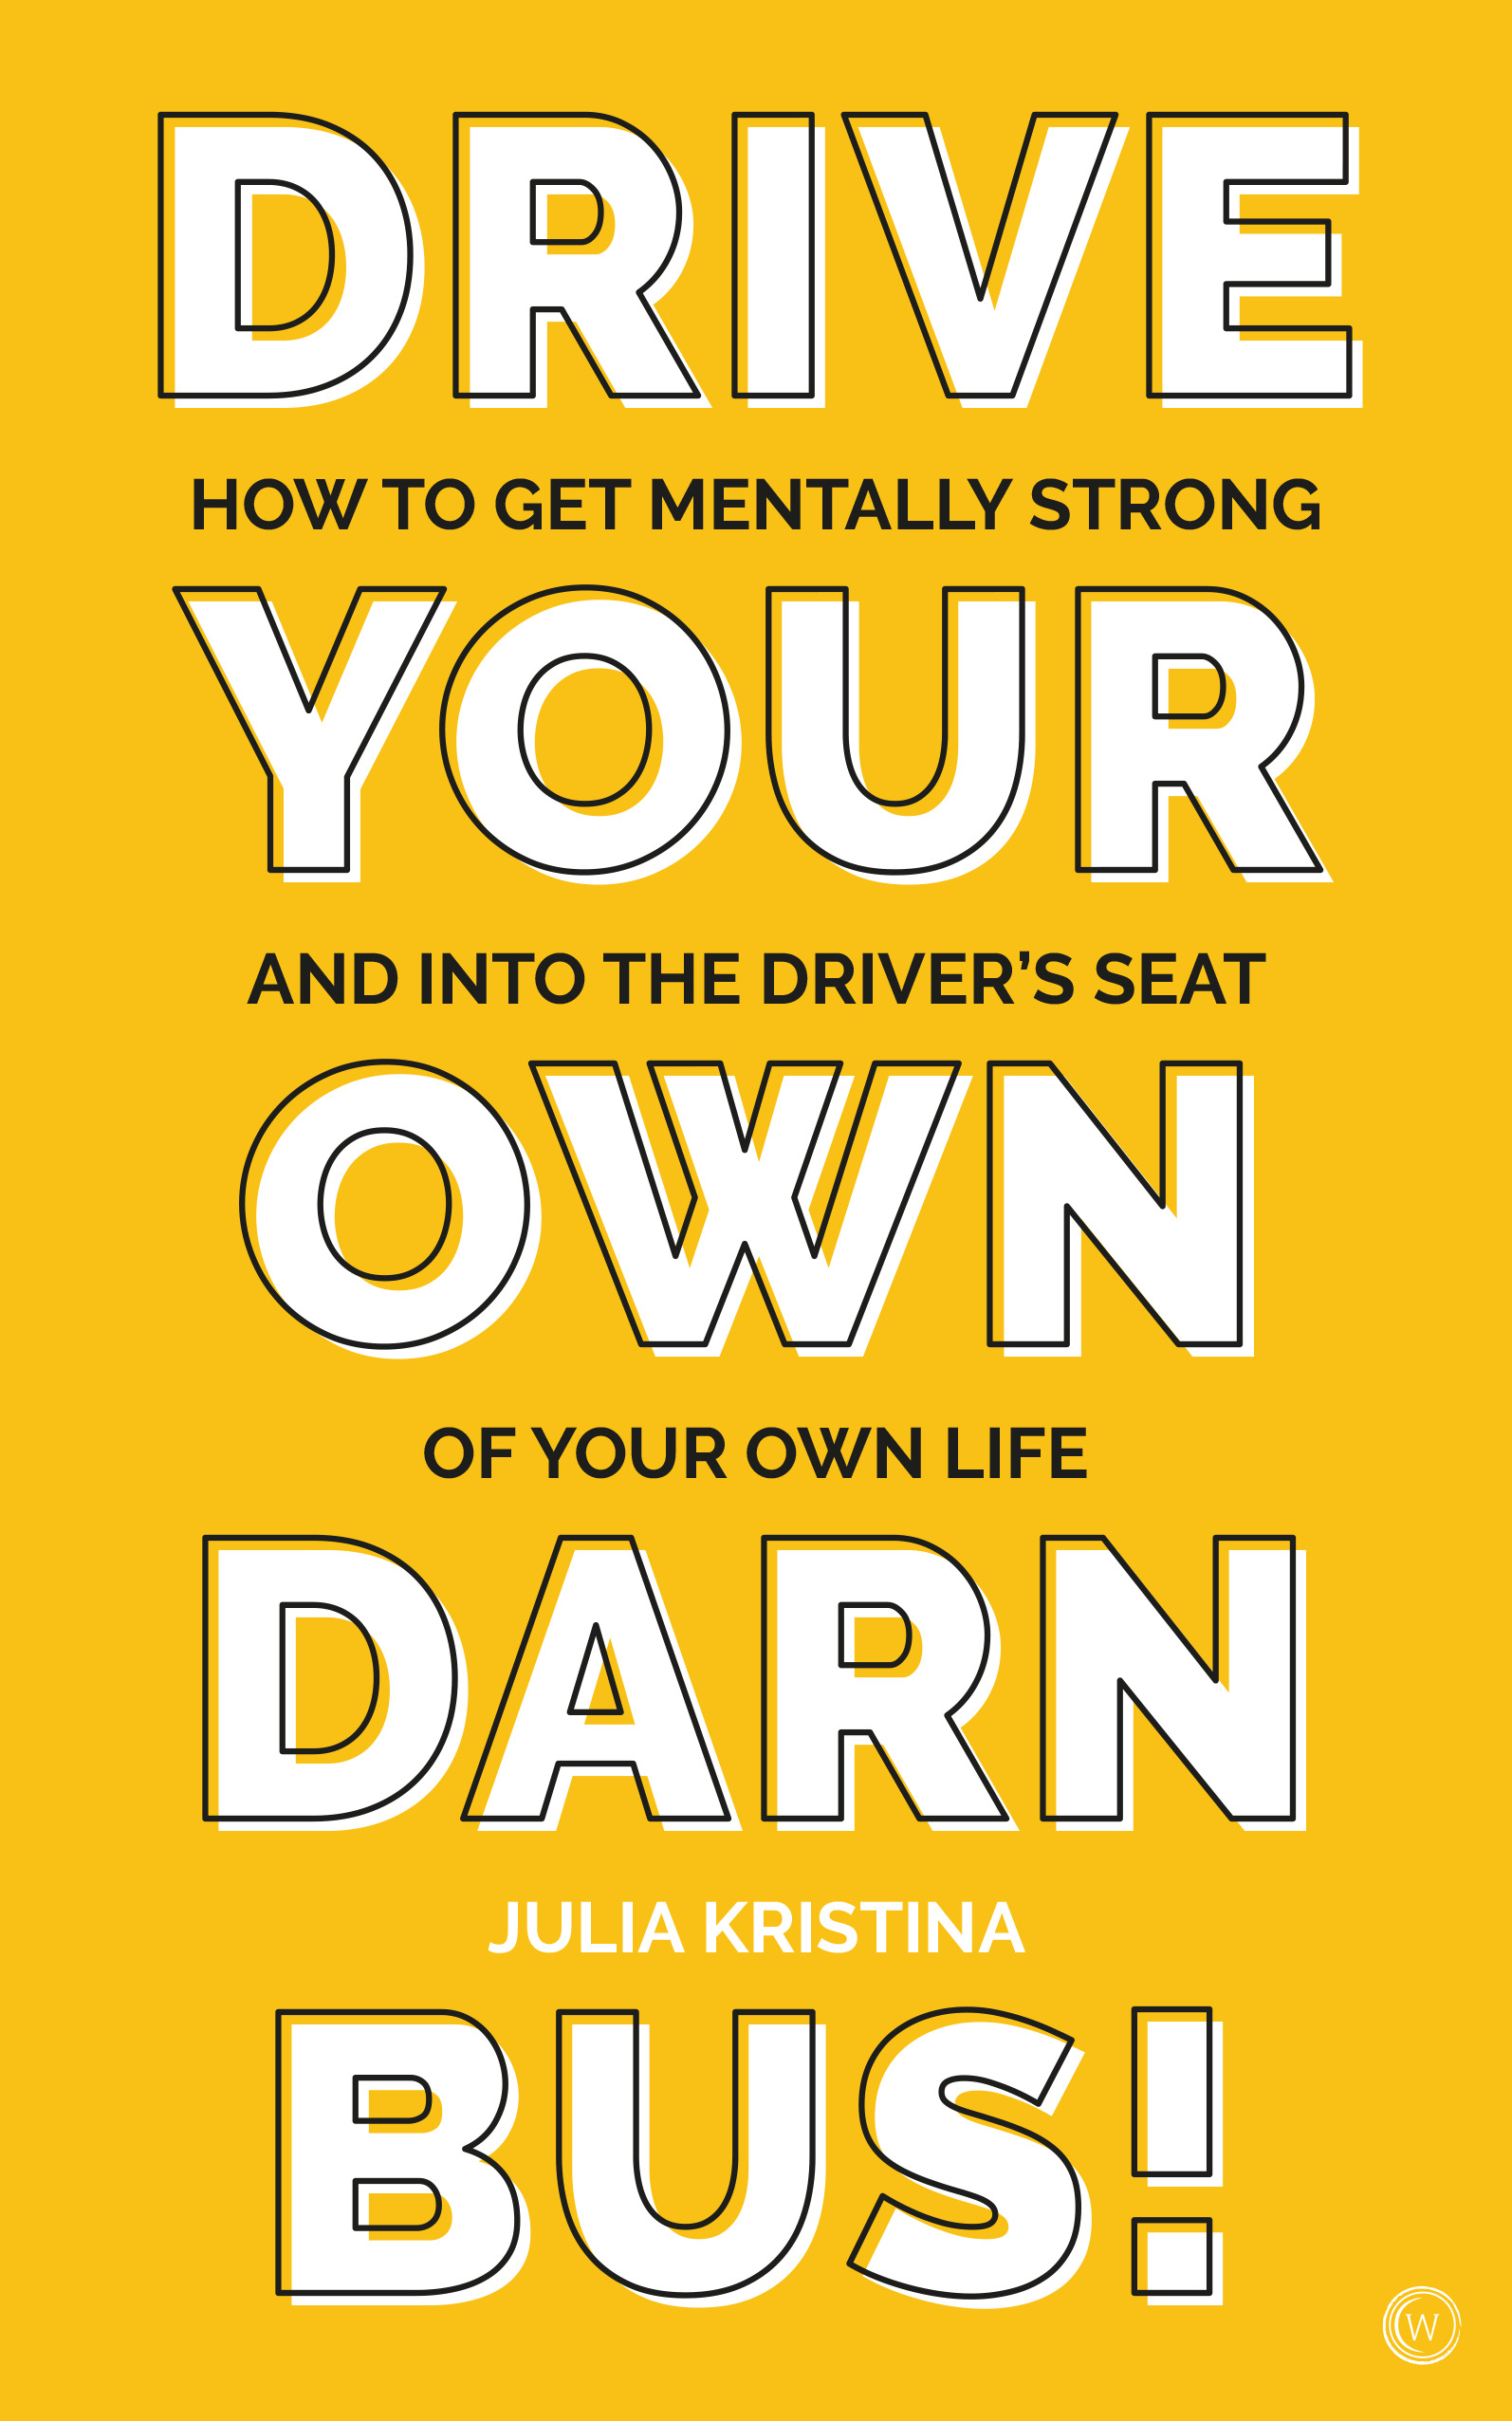 Drive Your Own Darn Bus! : How to Get Mentally Strong and into the Driver's Seat of Your Life | Psychology & Self-Improvement